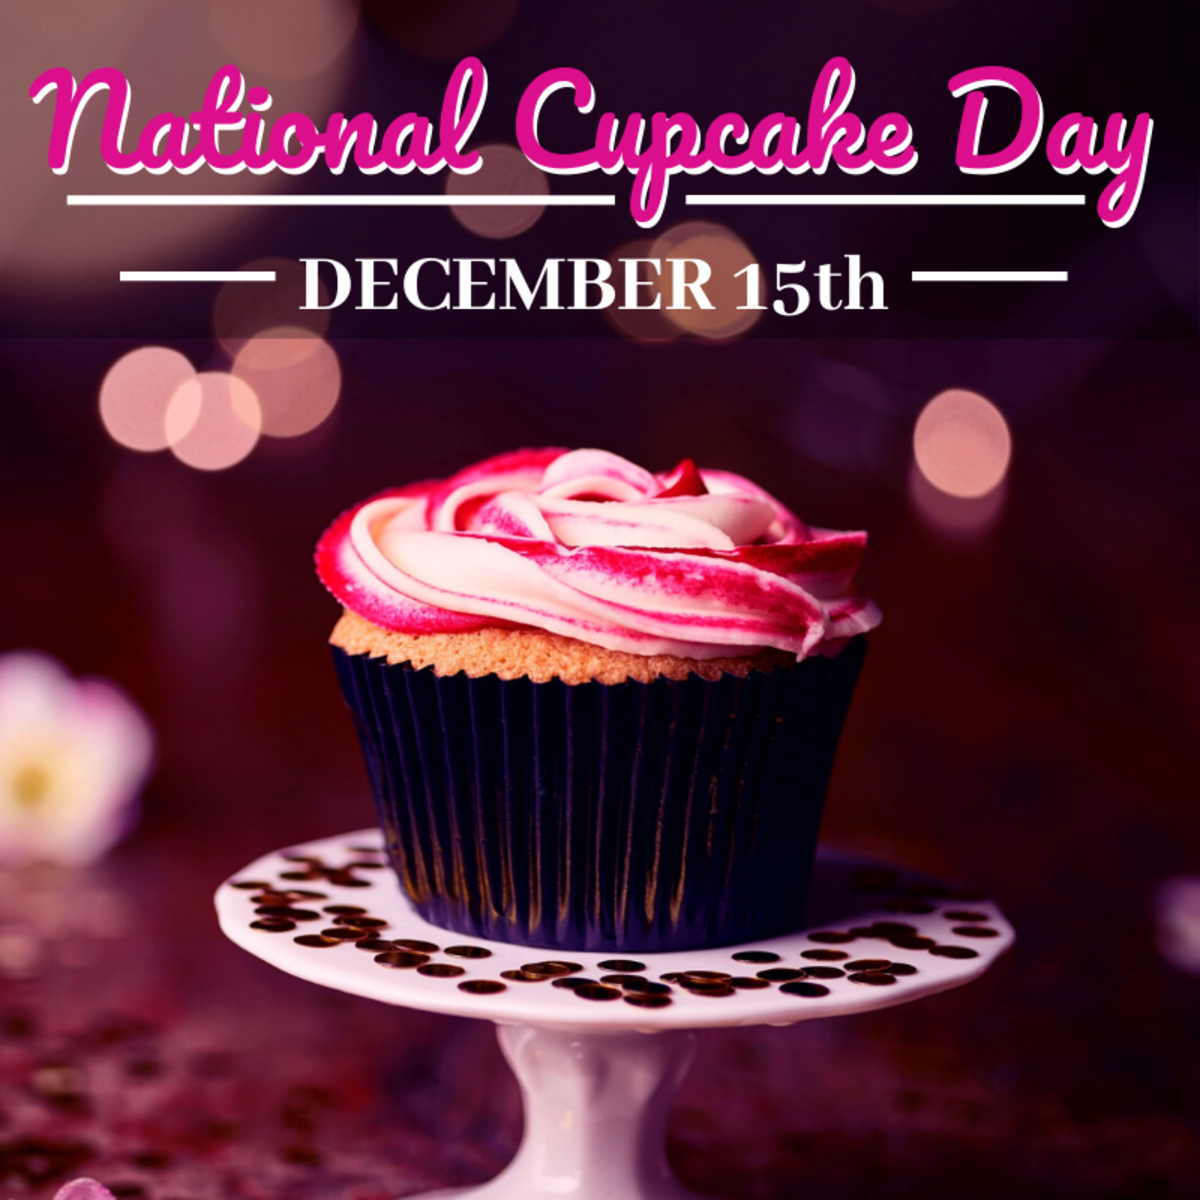 december-15th-is-national-cupcake-day.png